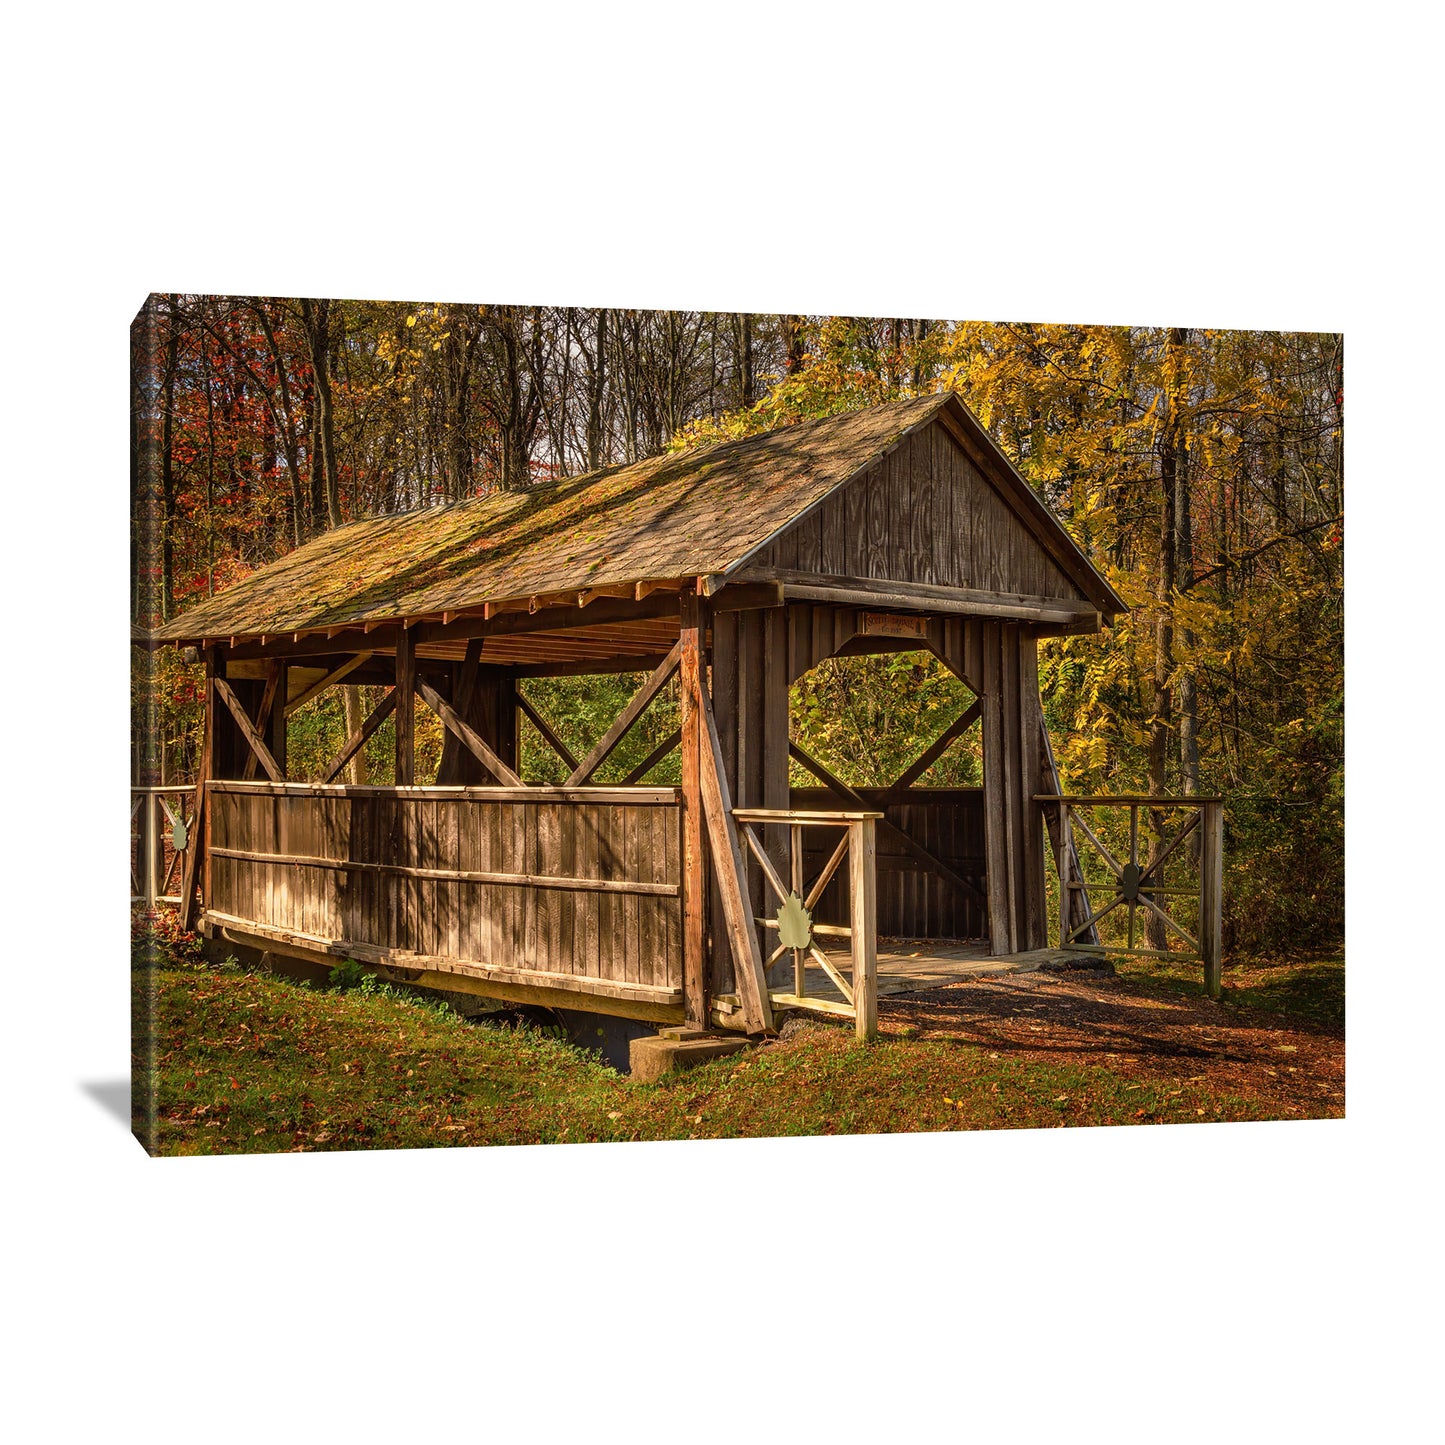 canvas wall art featuring a covered bridge in the edge of the fall forest